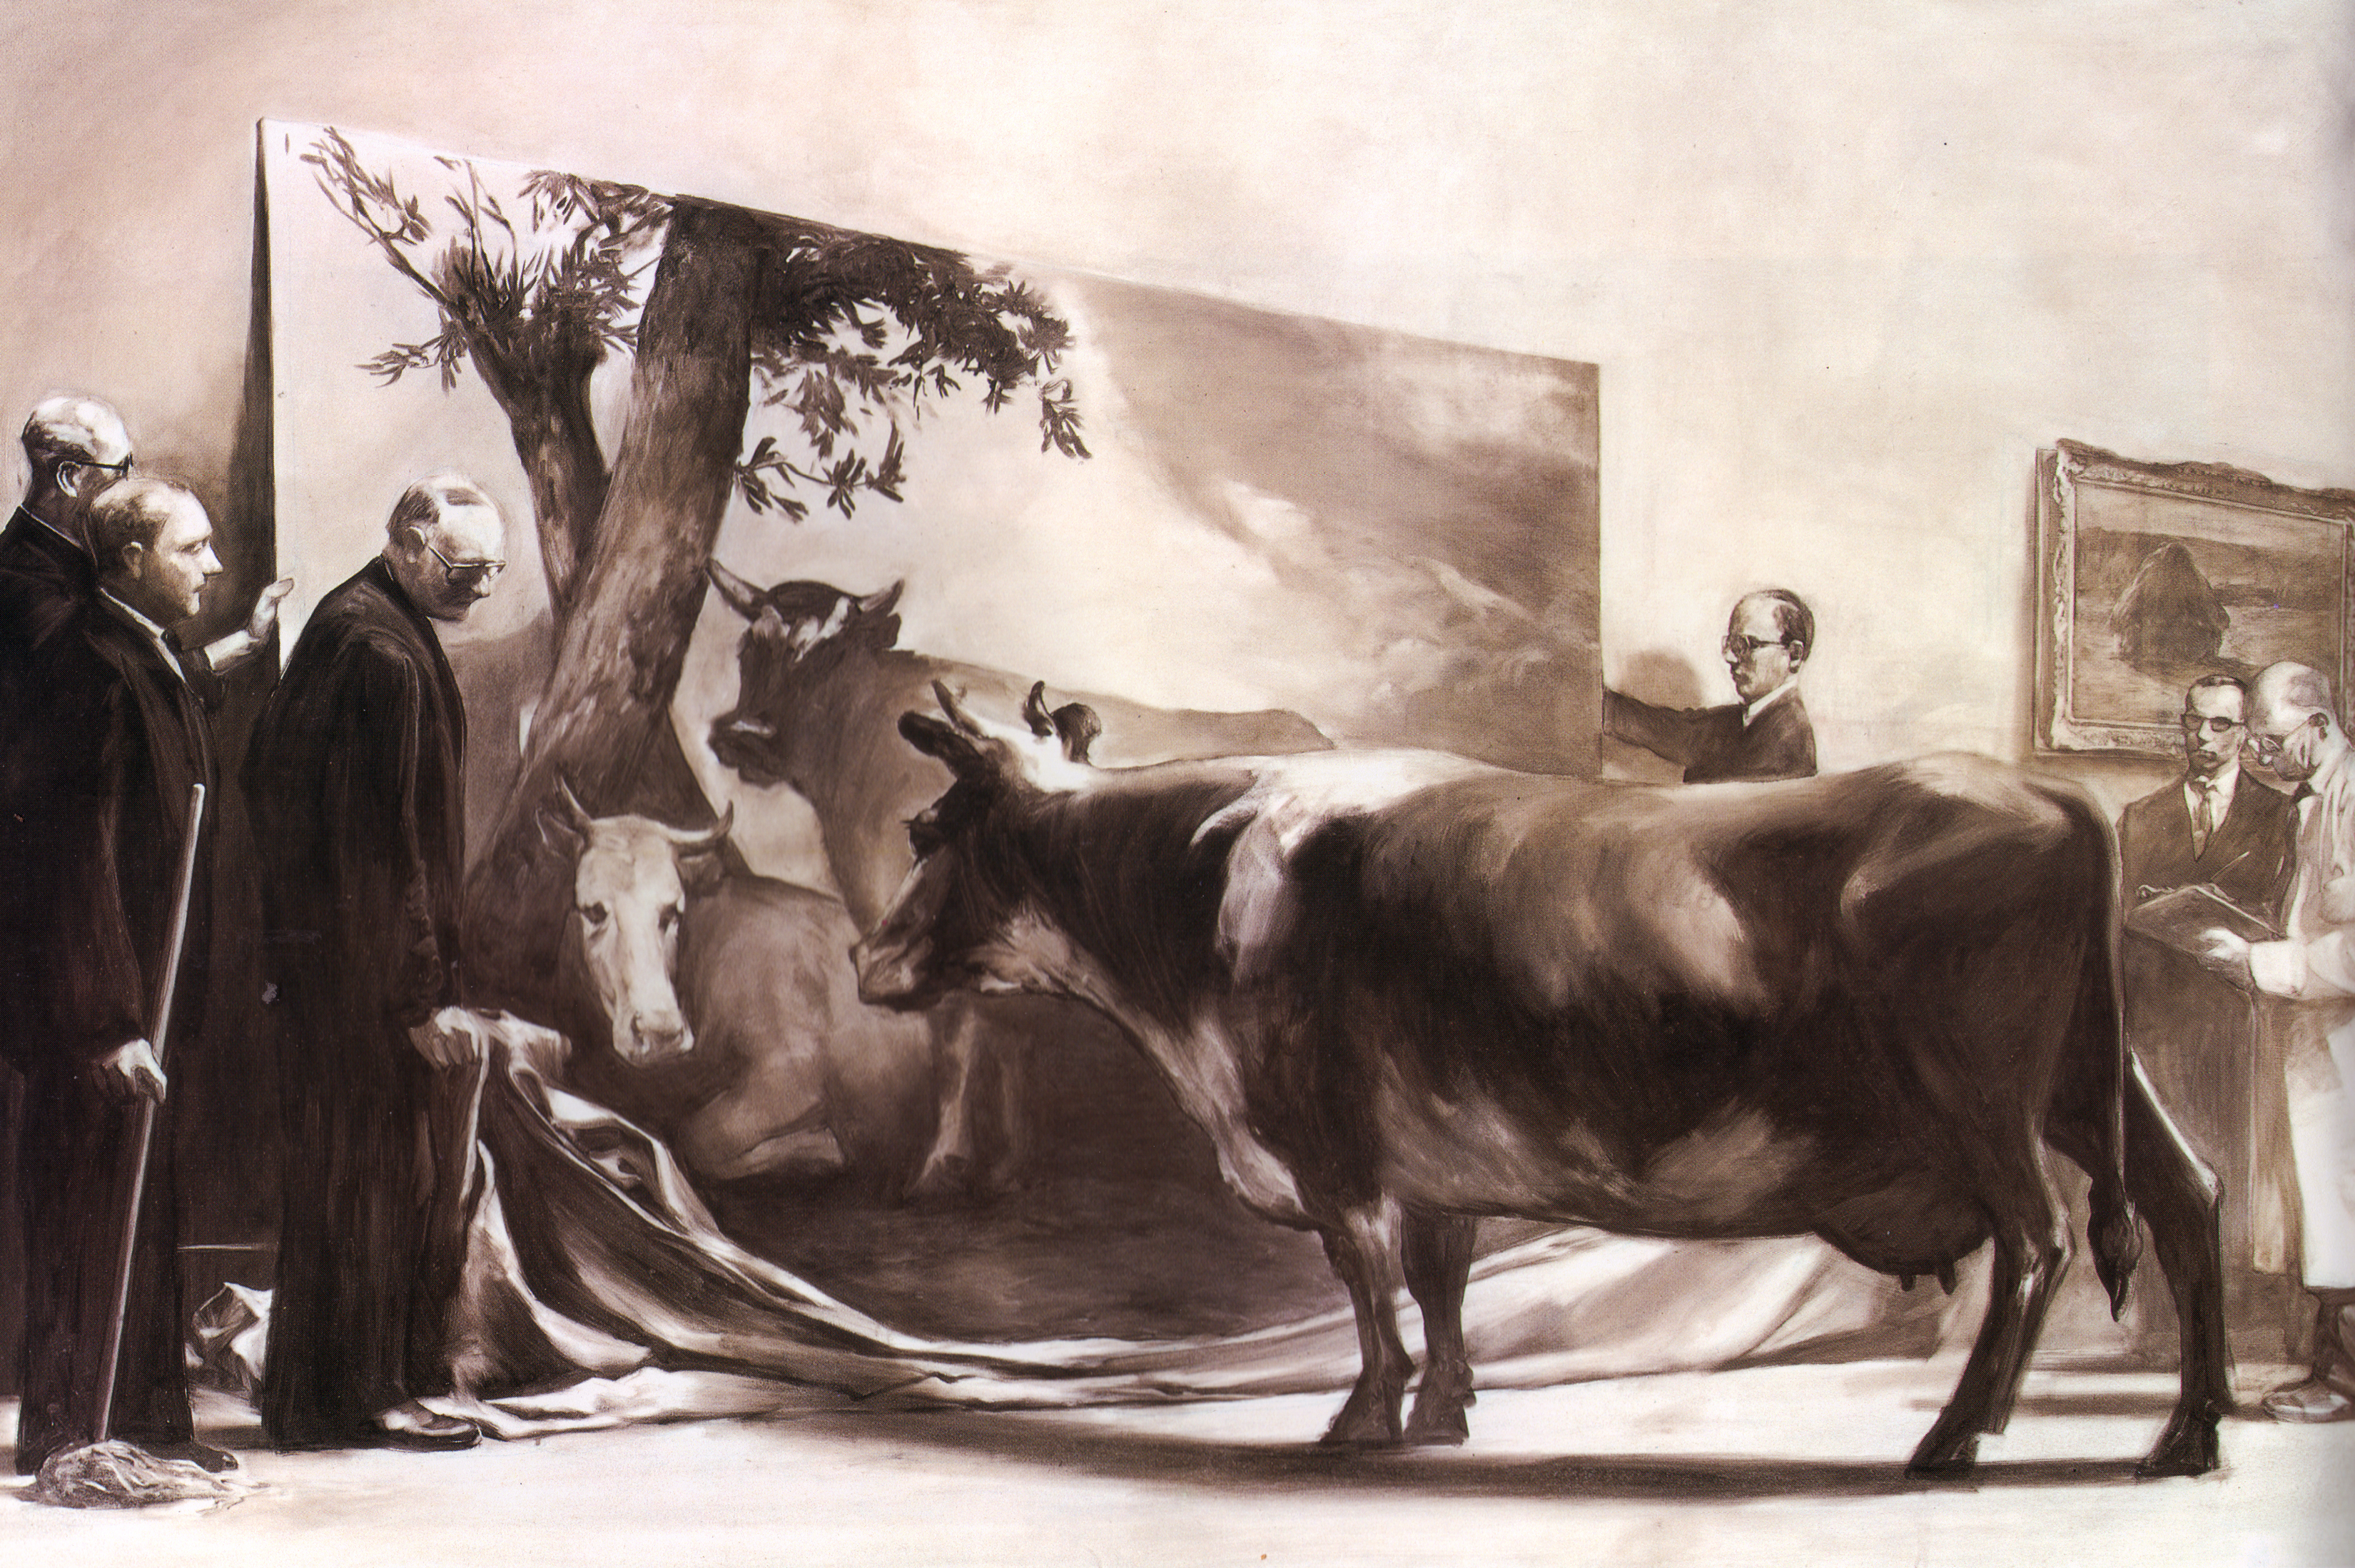 Dutch Golden Age & Cows: Mark Tansey, The Innocent Eye Test, 1981, The Metropolitan Museum of Art, New York, NY, USA.